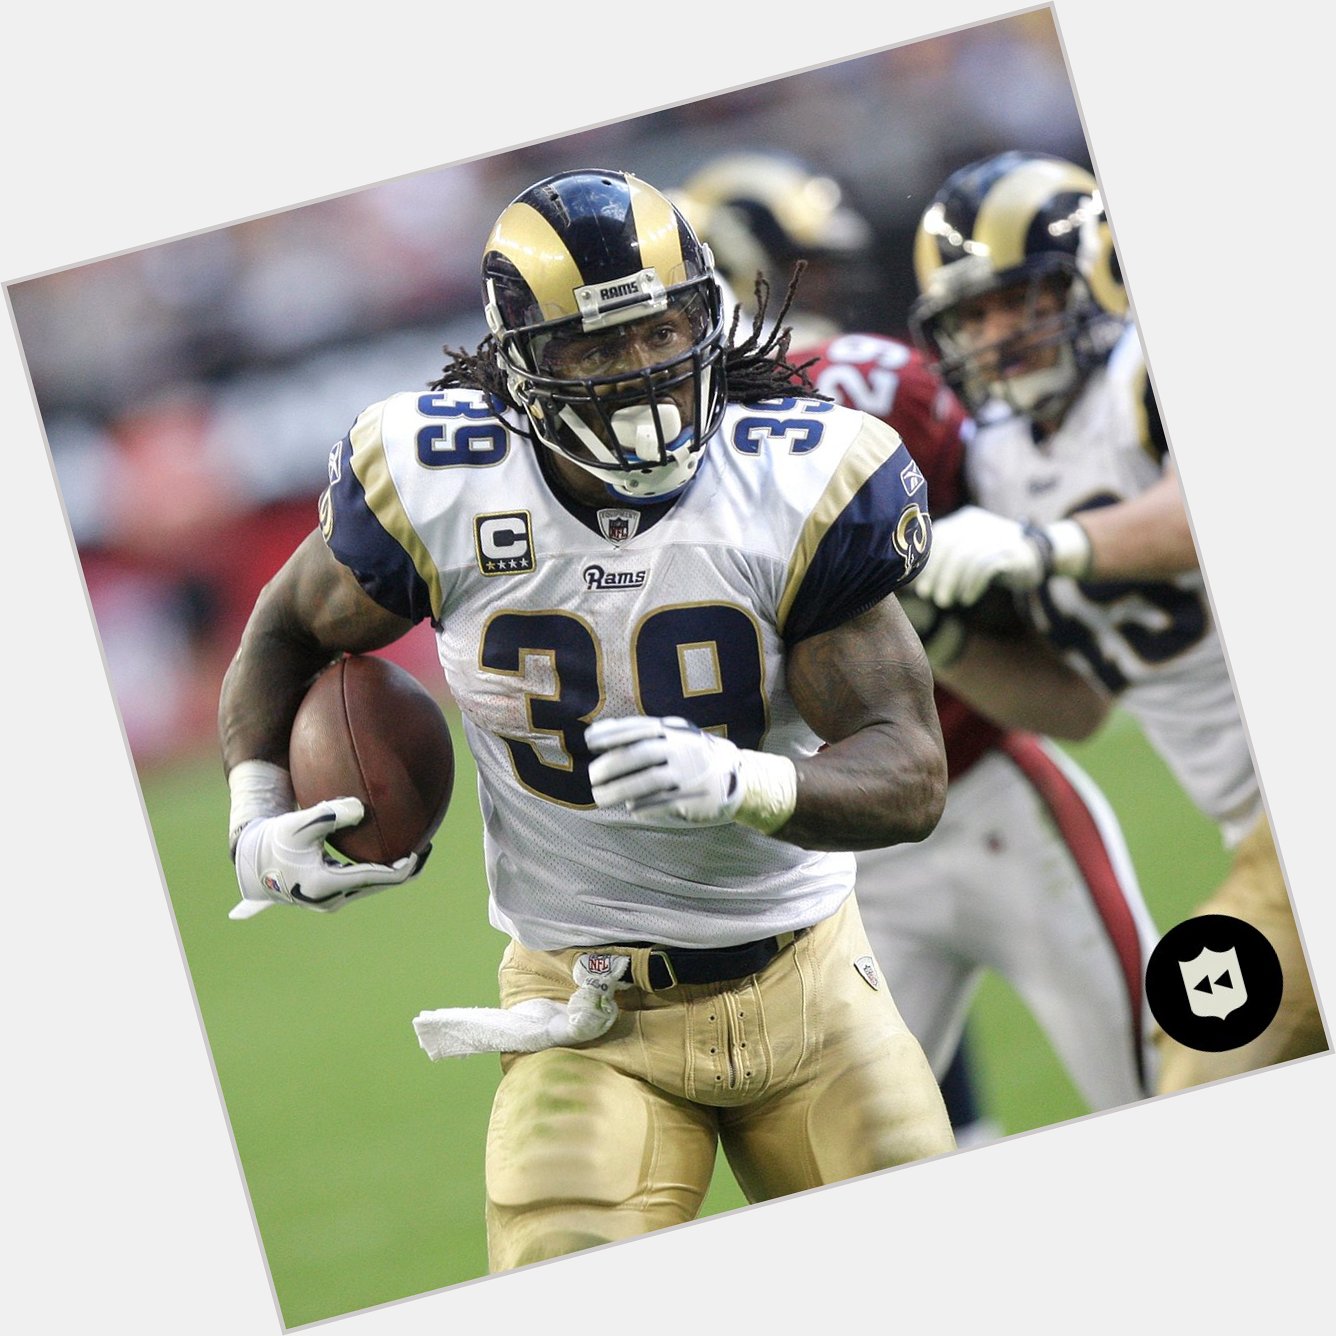 Happy 38th birthday to Steven Jackson. He is still the Rams franchise leader in rushing yards.  